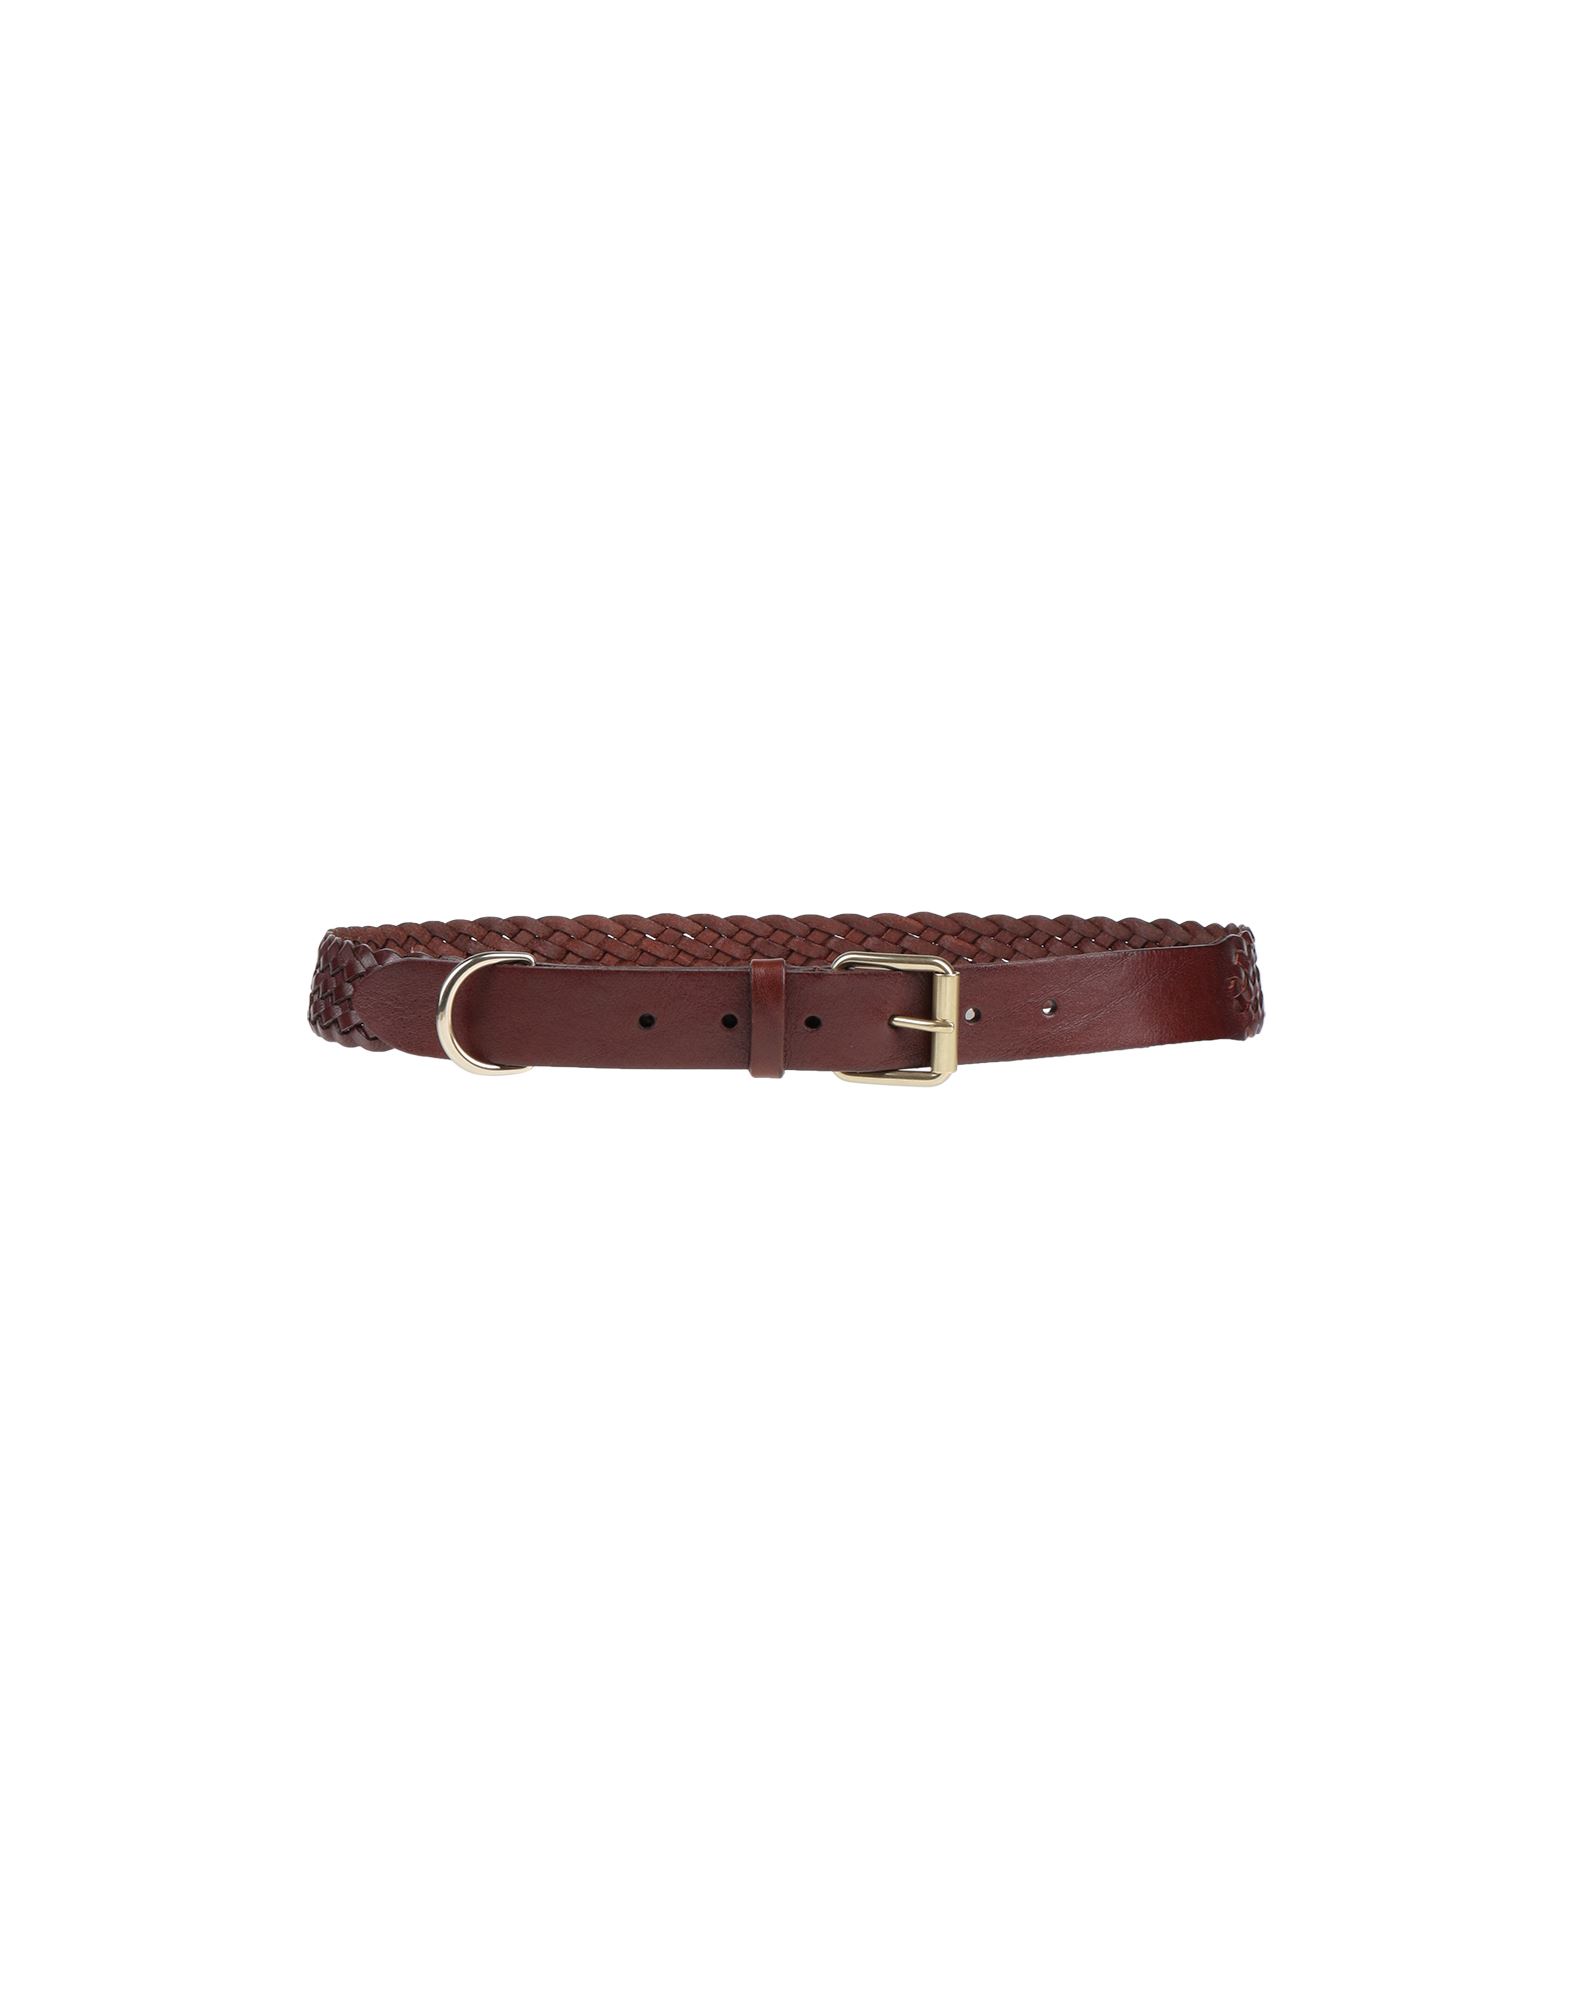 Anderson's Belts In Brown